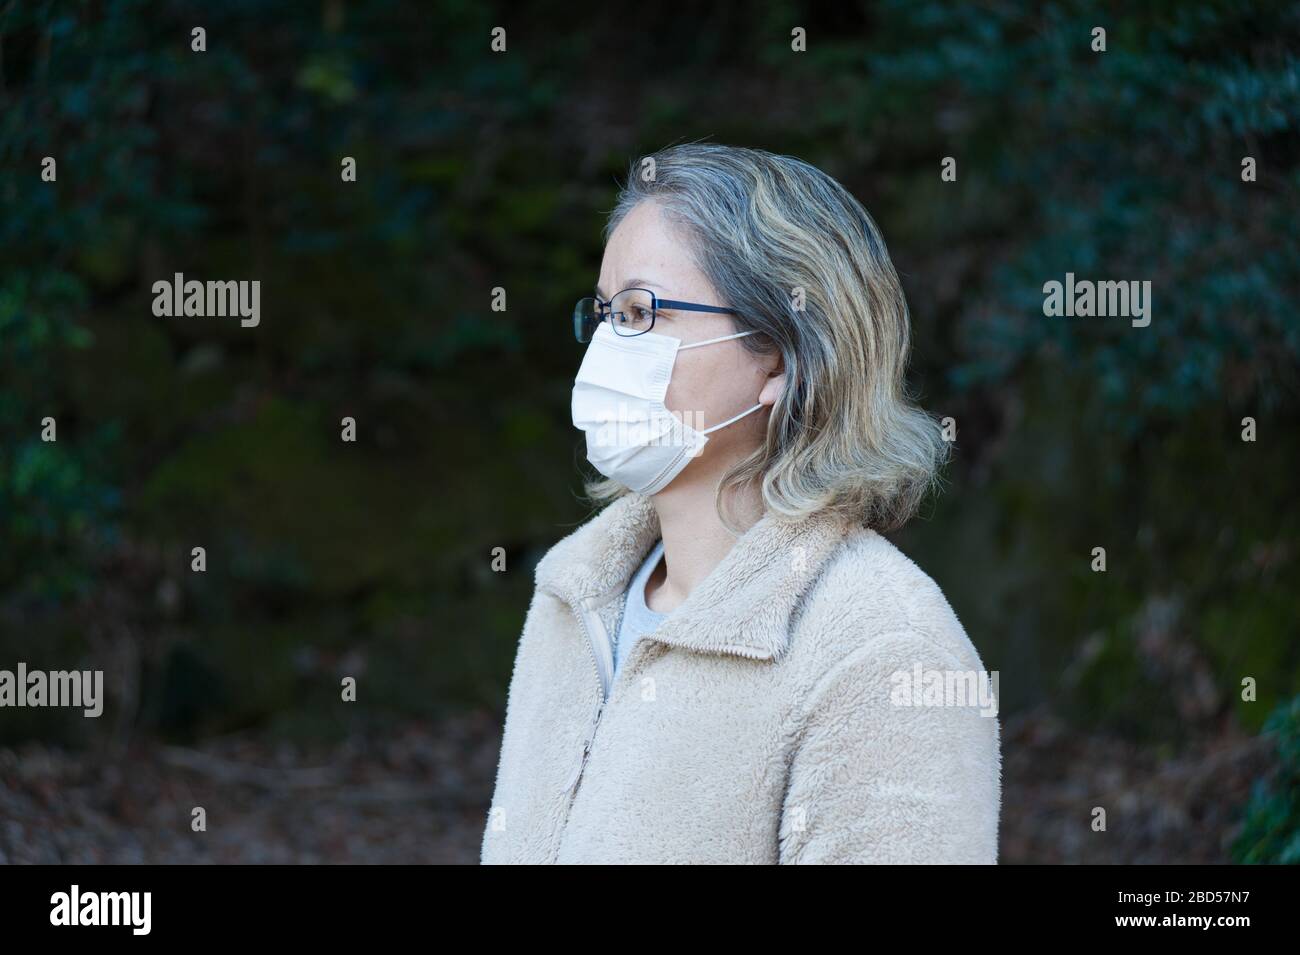 Woman 40-49 years outdoors, wearing glasses and white mask for protection against Coronavirus COVID-19 (SARS-CoV-2) and other contagious diseases. Stock Photo